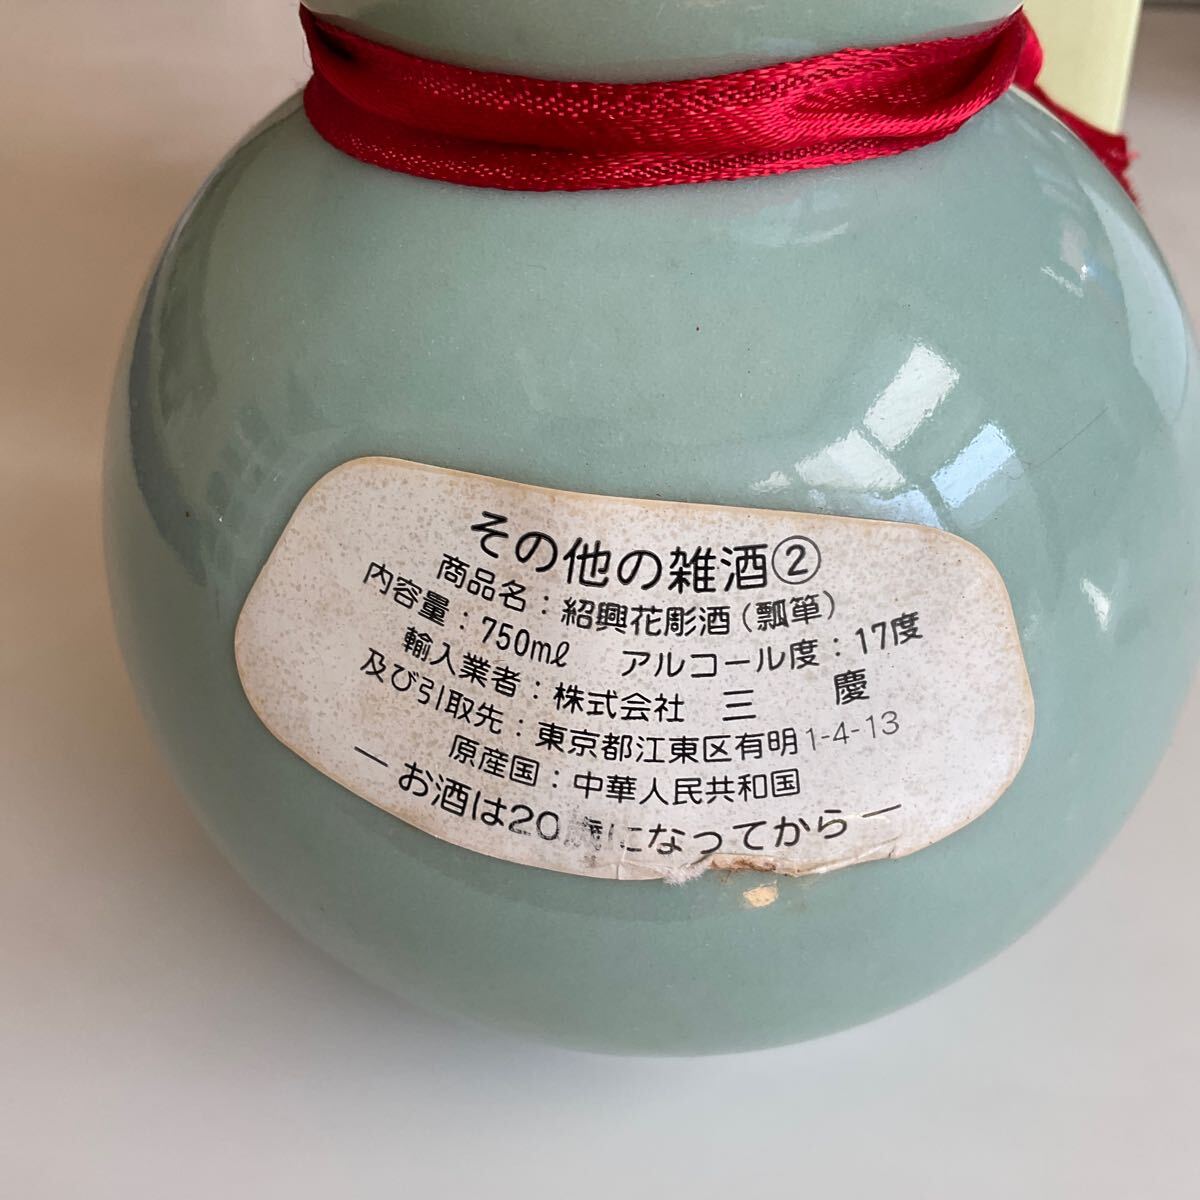 * China name sake * shaoxingjiu * China * Chinese person . also peace country *.. flower carving sake * China ..* delivery *1F-009* unopened *..*